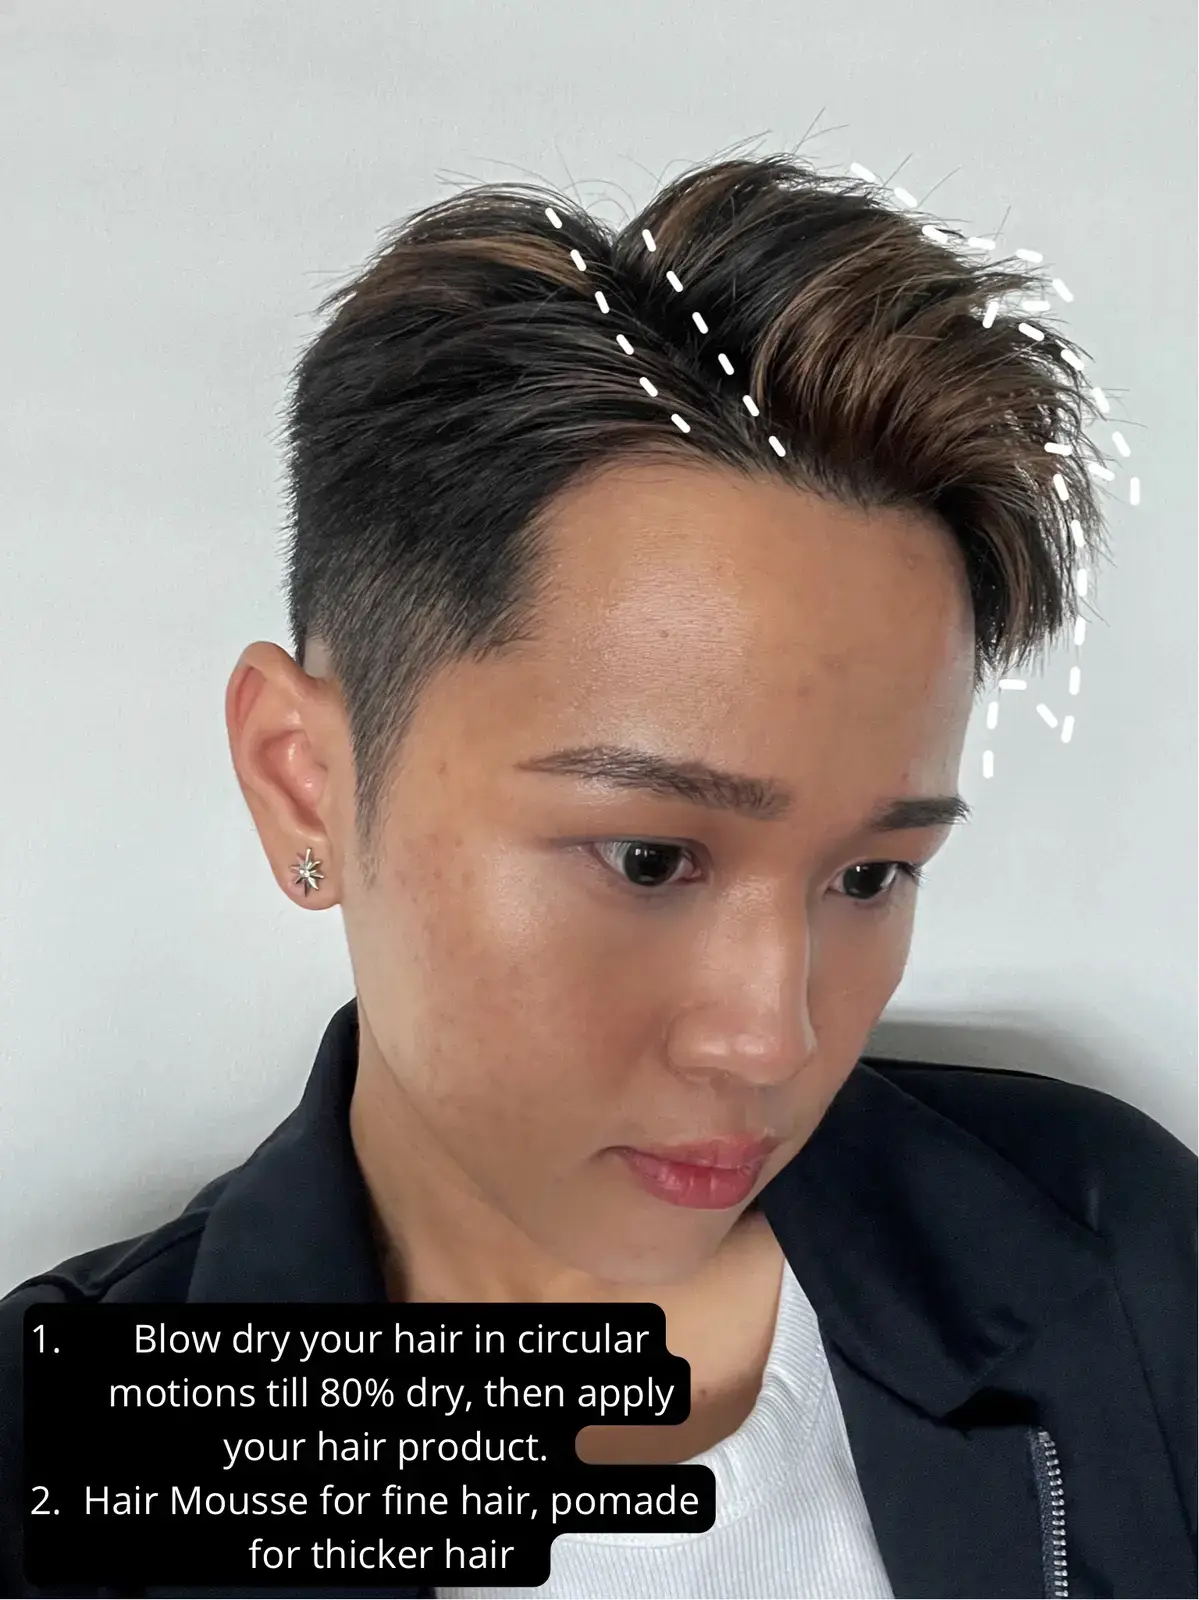 MENS HAIR REFERENCE 🔥 | FRESH AND CLEAN | Gallery posted by jeremy_khoo |  Lemon8